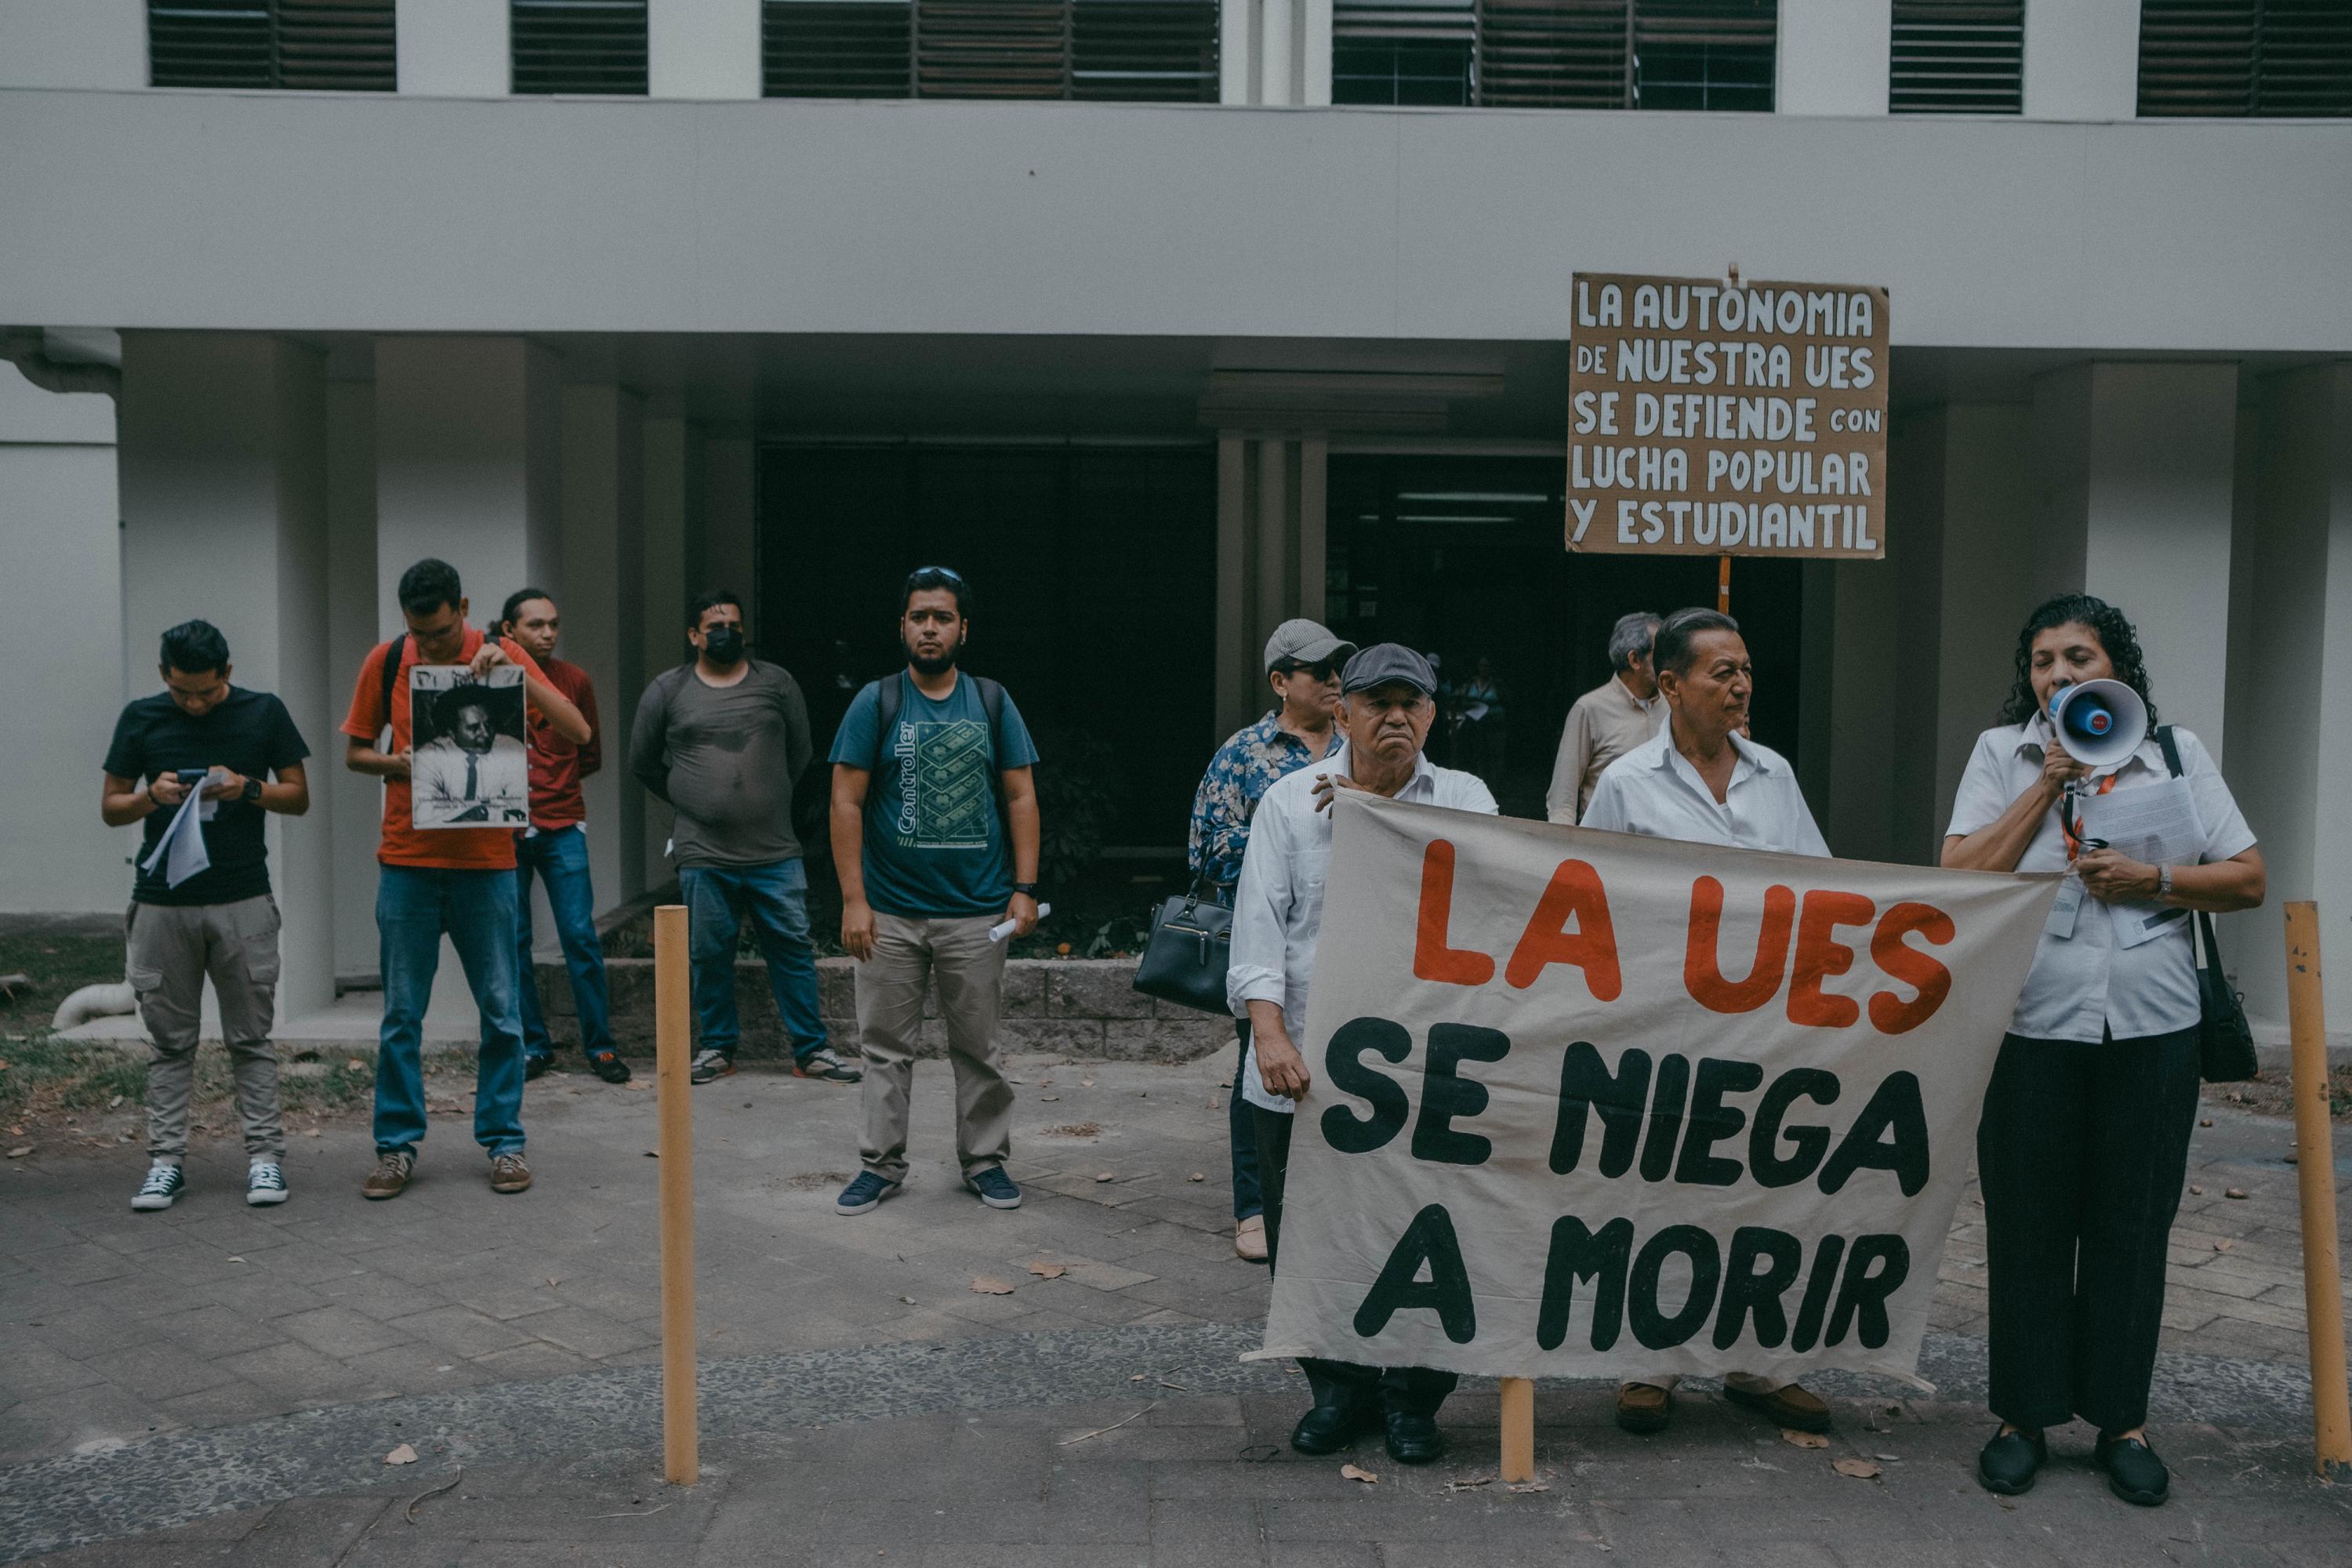 In November 2018, Nayib Bukele promised to turn the public University of El Salvador (UES) into the best college in Central America. More than five years later, a culture of intimidation has been instilled on campus. “Fear has taken hold of everyone here,” says one of the demonstrators in a small march held on May 27 to protest the use of university facilities for non-academic purposes, speaking in a quiet voice. Amid a deepening financial crisis resulting from accumulated government debt, which now totals $51.3 million, even the rector of the UES admits that “there is fear of expressing oneself.” In February 2024, the UES hosted militants of the ruling Nuevas Ideas party to work on the final ballot count for the presidential and legislative elections. In June, the government again used the facilities to host “journalists” covering Bukele’s unconstitutional inauguration. Photo by Carlos Barrera.